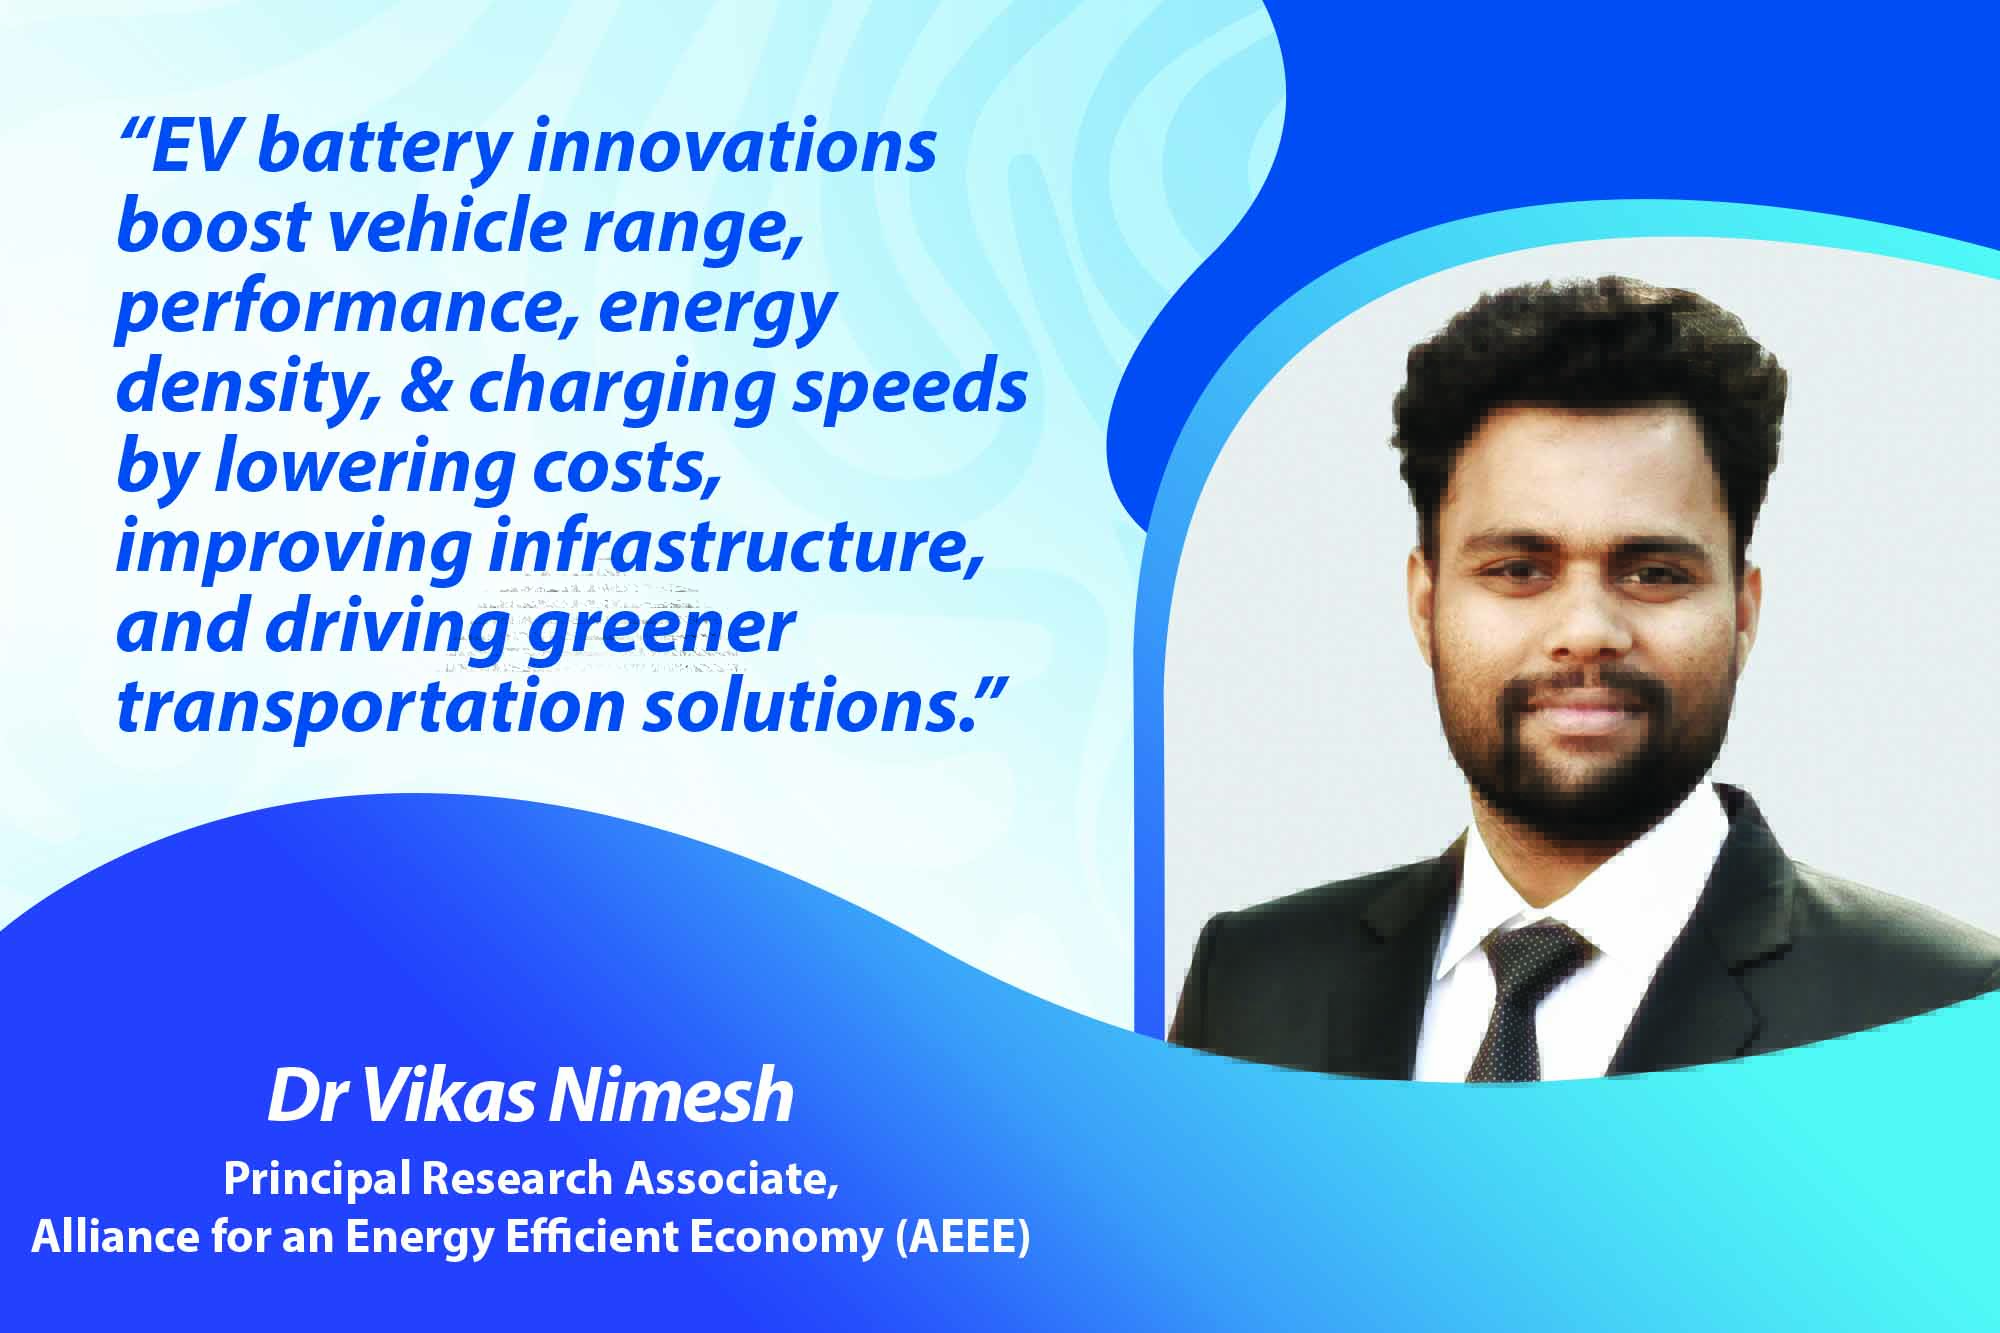 Fuelling e-mobility with breakthroughs in battery technology